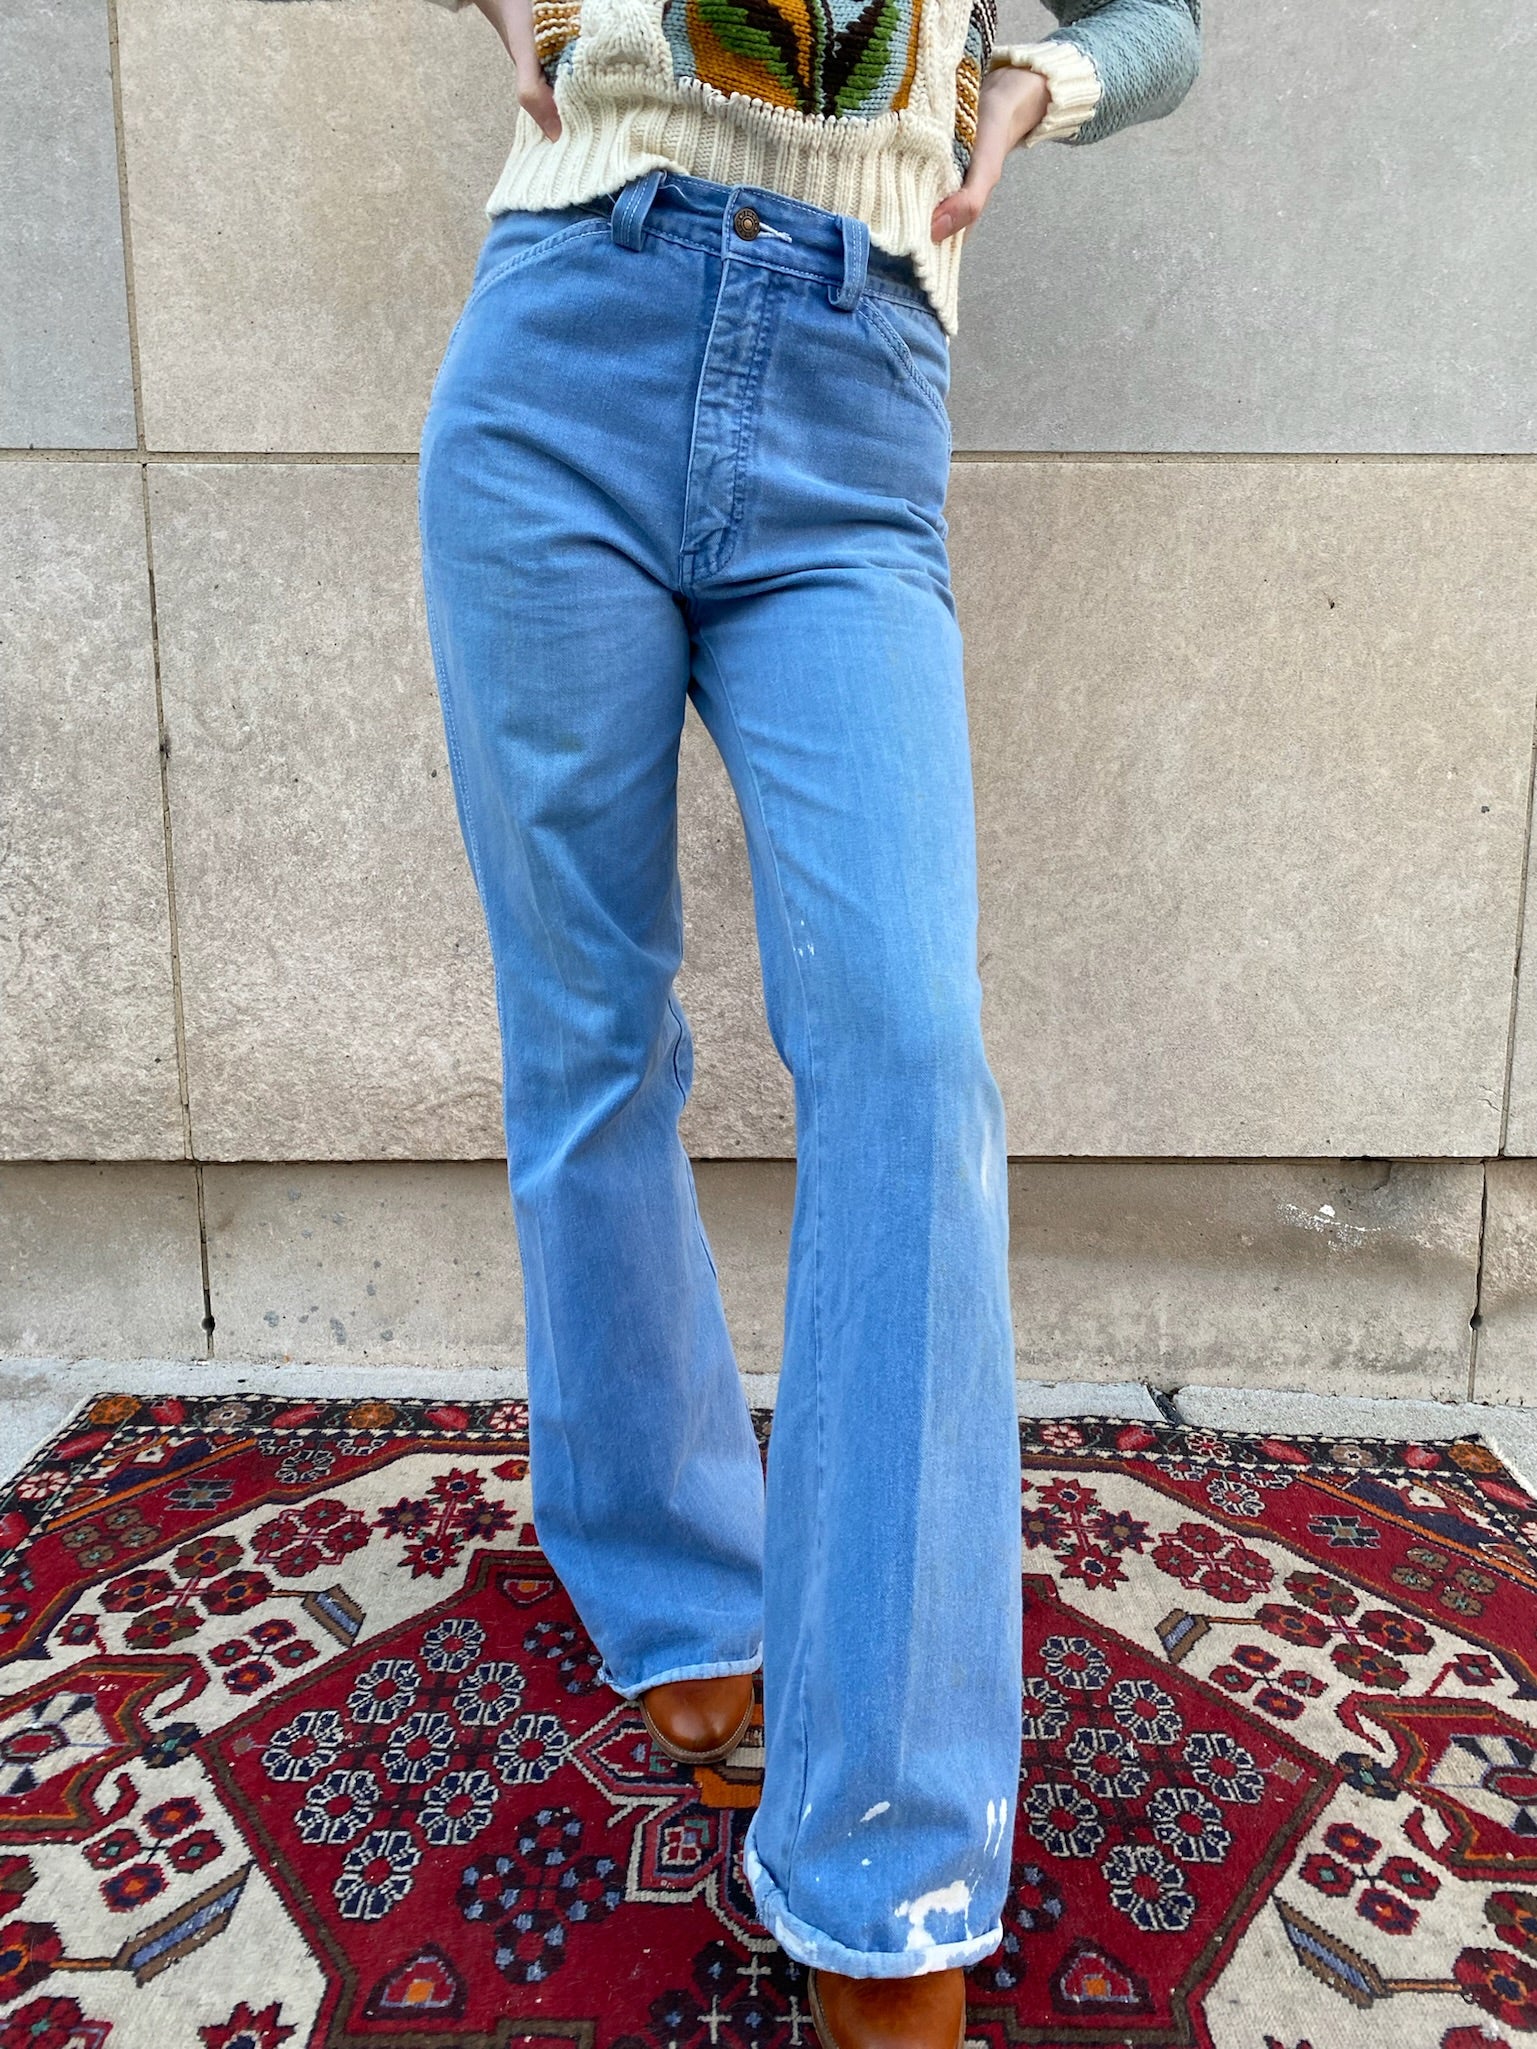 Buy Bell Bottom Jeans for Women Ripped High Waisted Classic Flared Denim  Pants, Blue2402, Small at Amazon.in